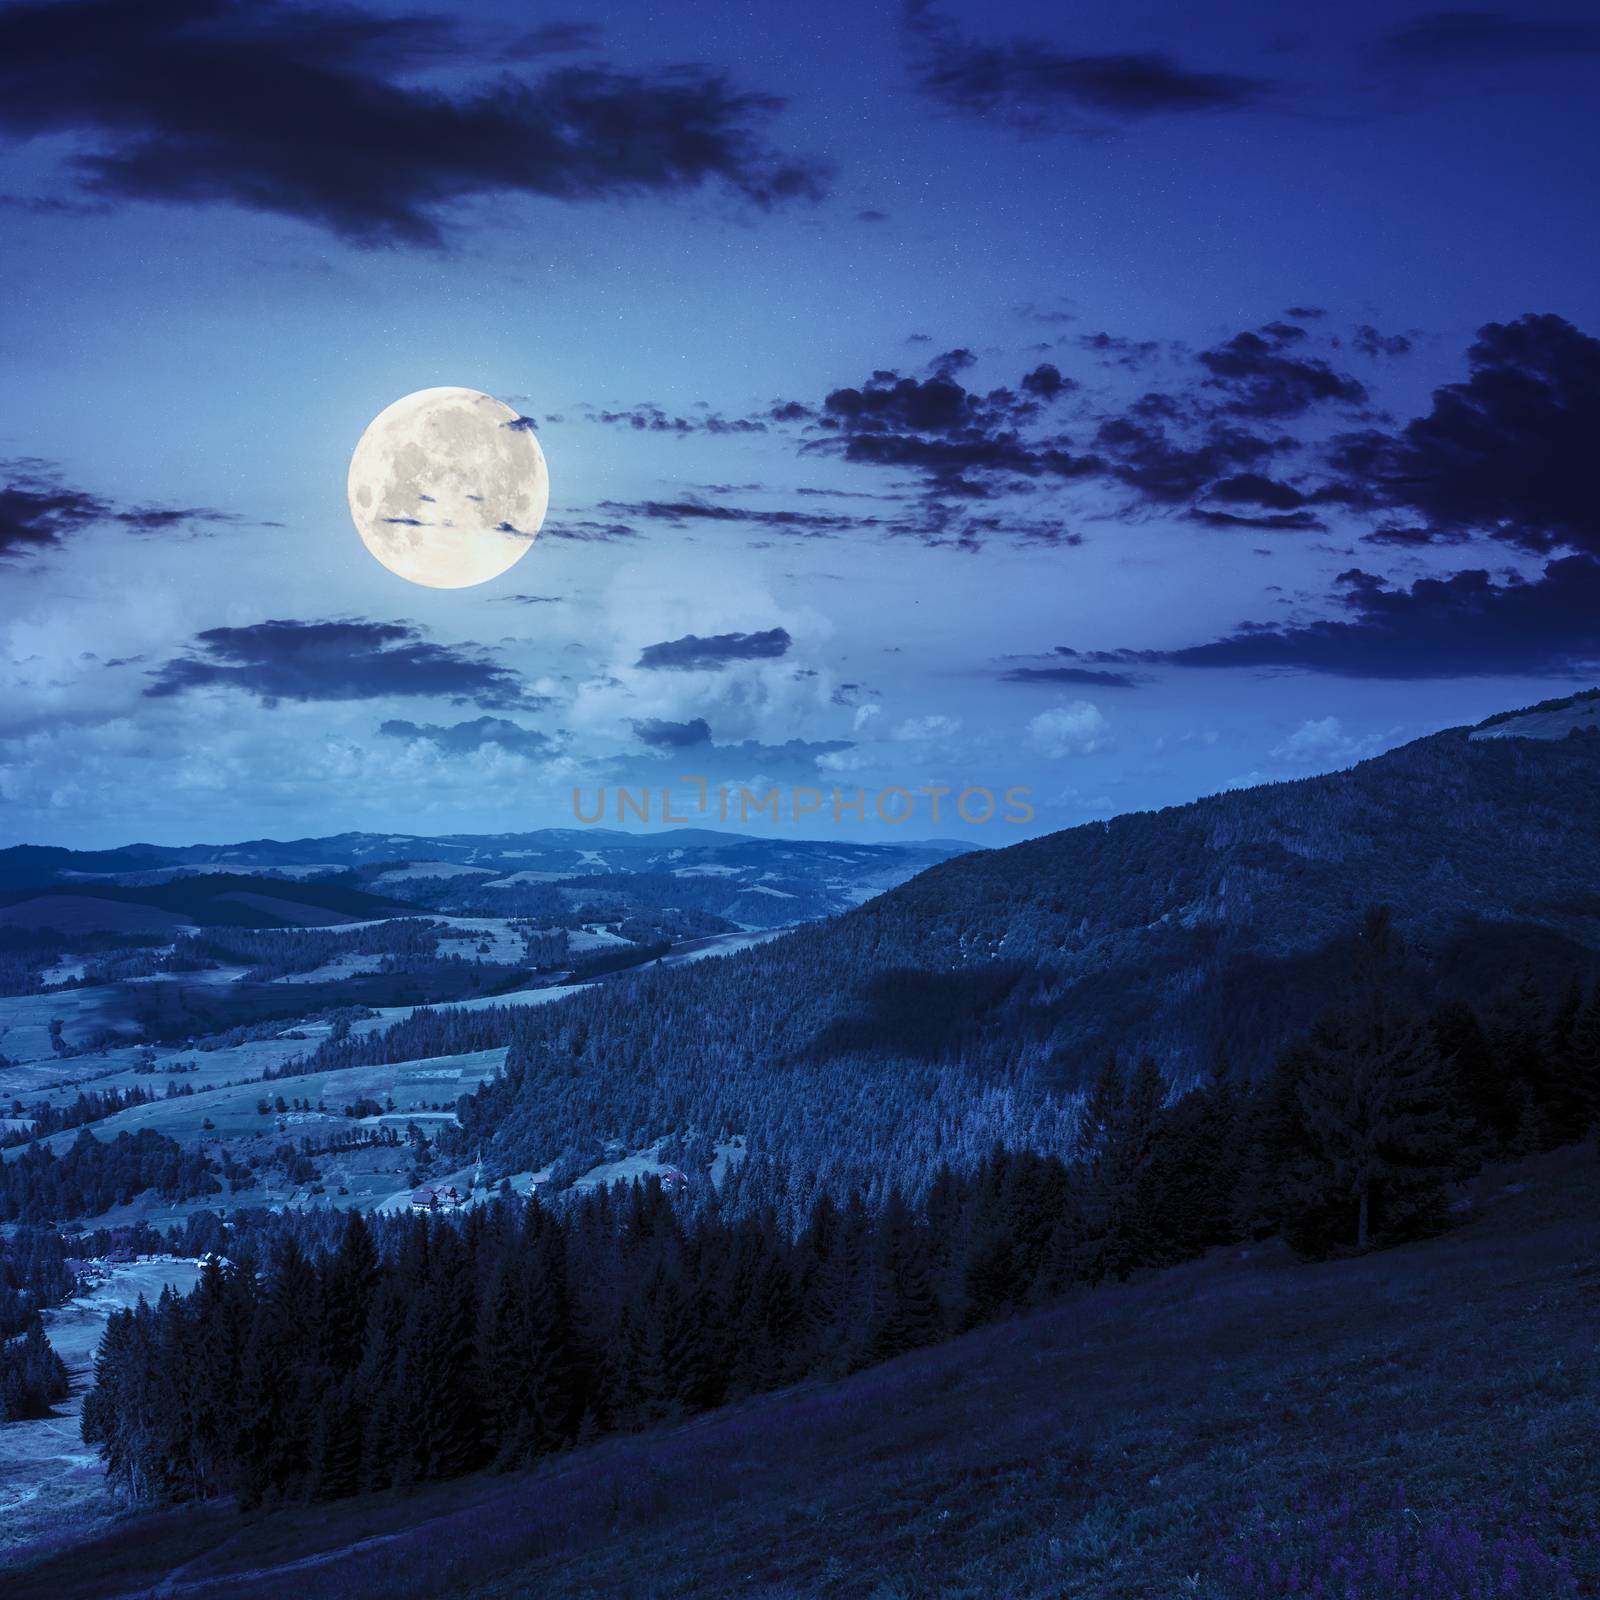 purple flowers on slope of mountain range with coniferous forest and village at night in full moon light